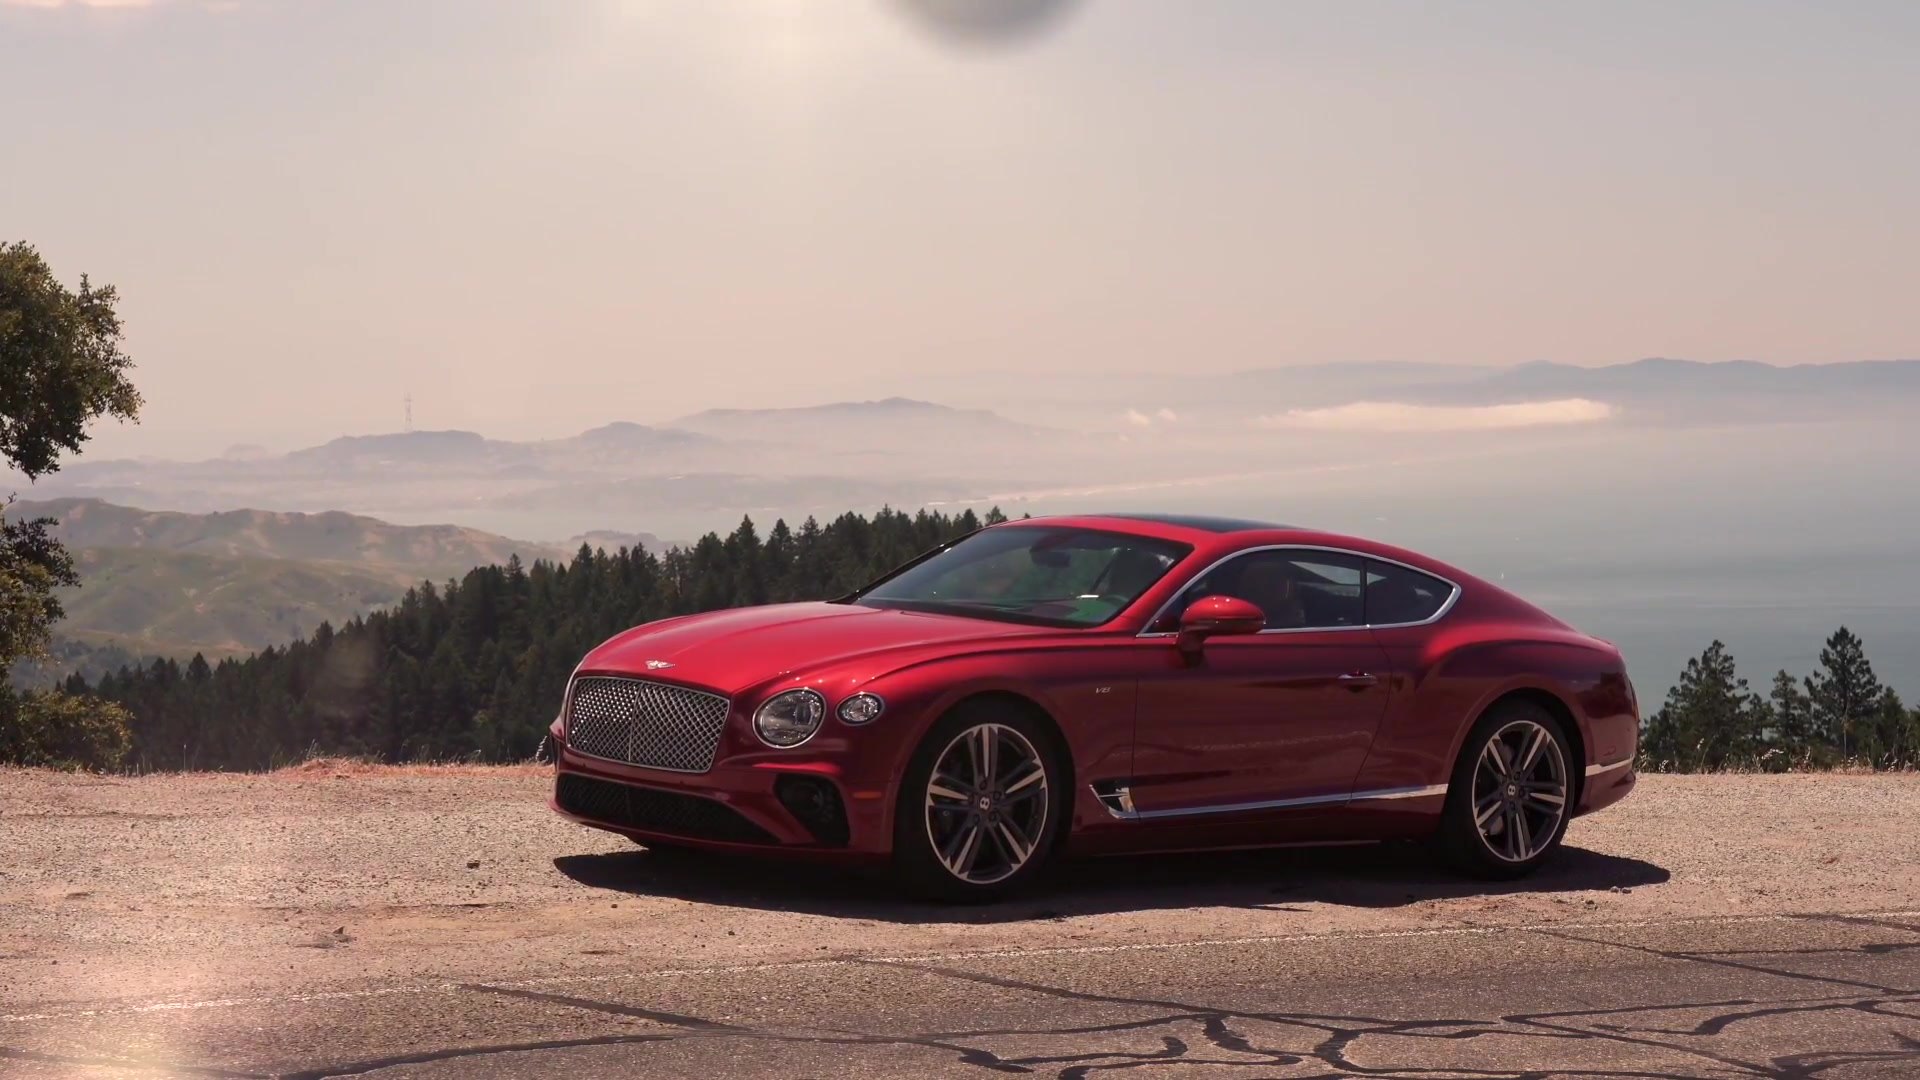 Bentley Continental GT V8 Design in Red - video Dailymotion